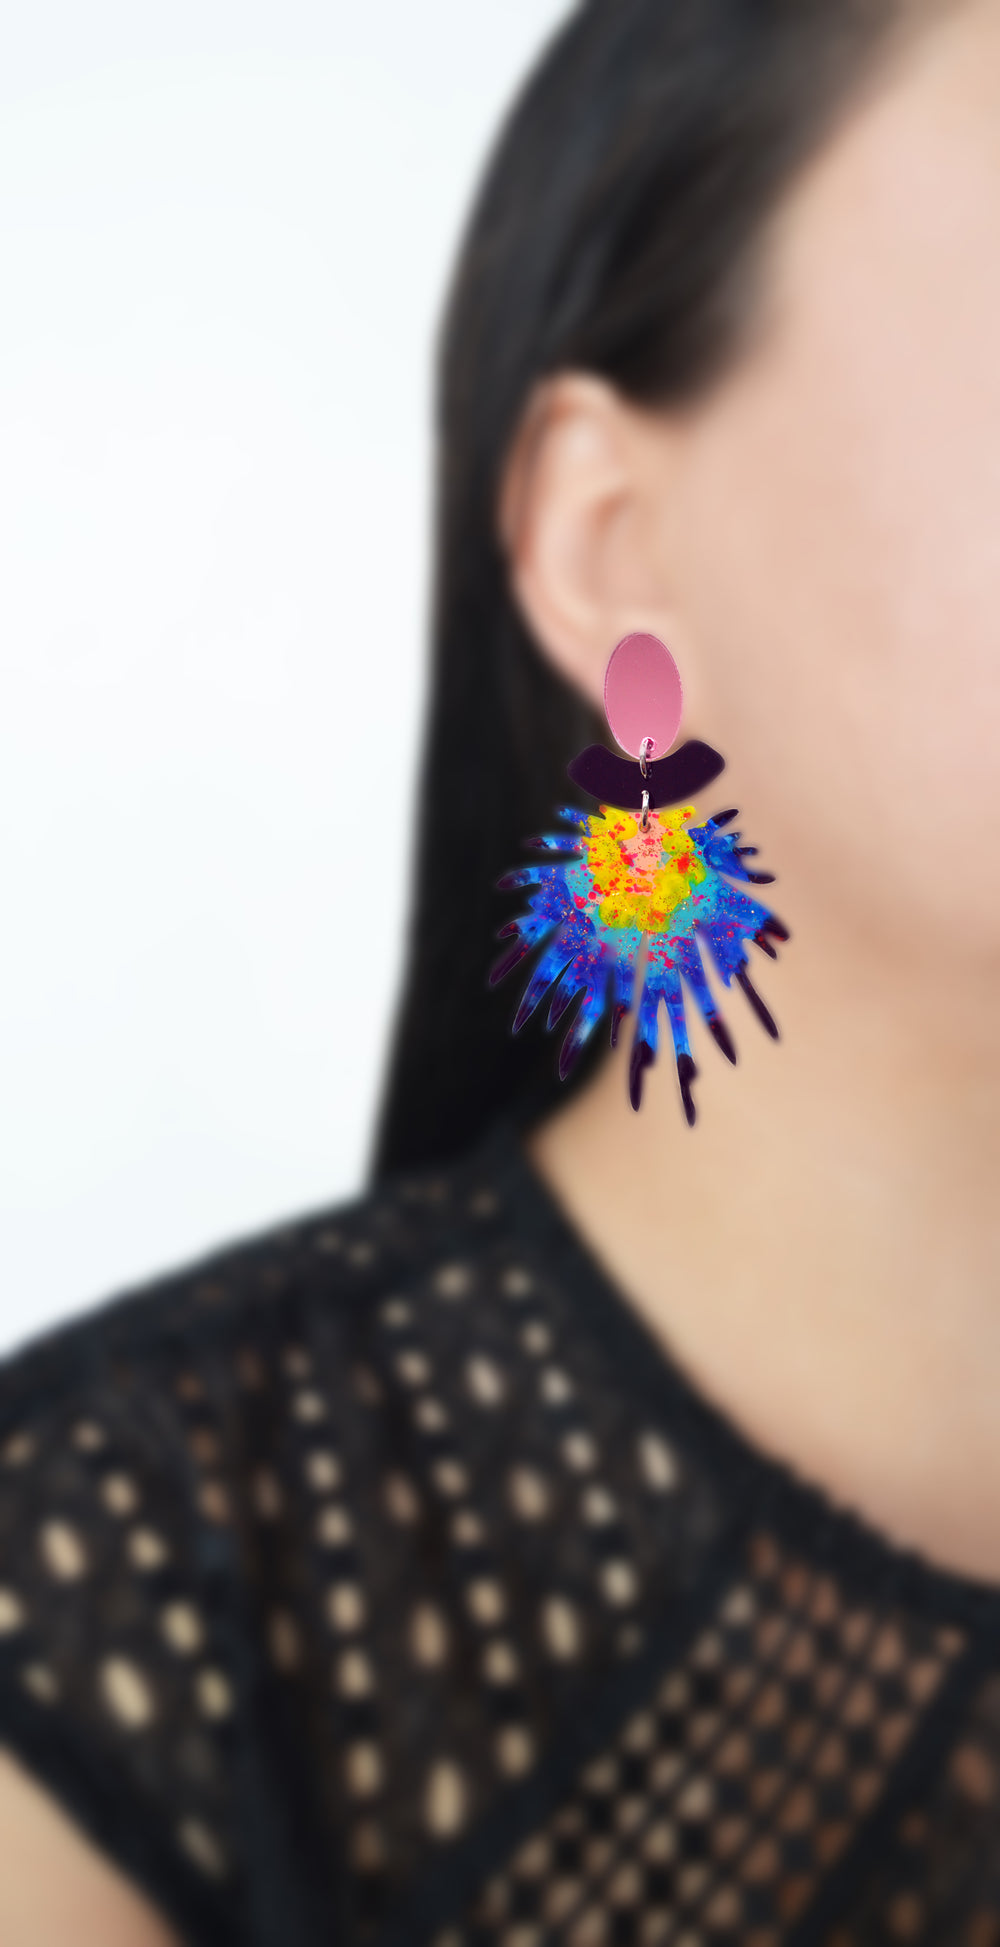 Pom Blue and Pink Laser Cut Resin Earrings, Acrylic Jewelry